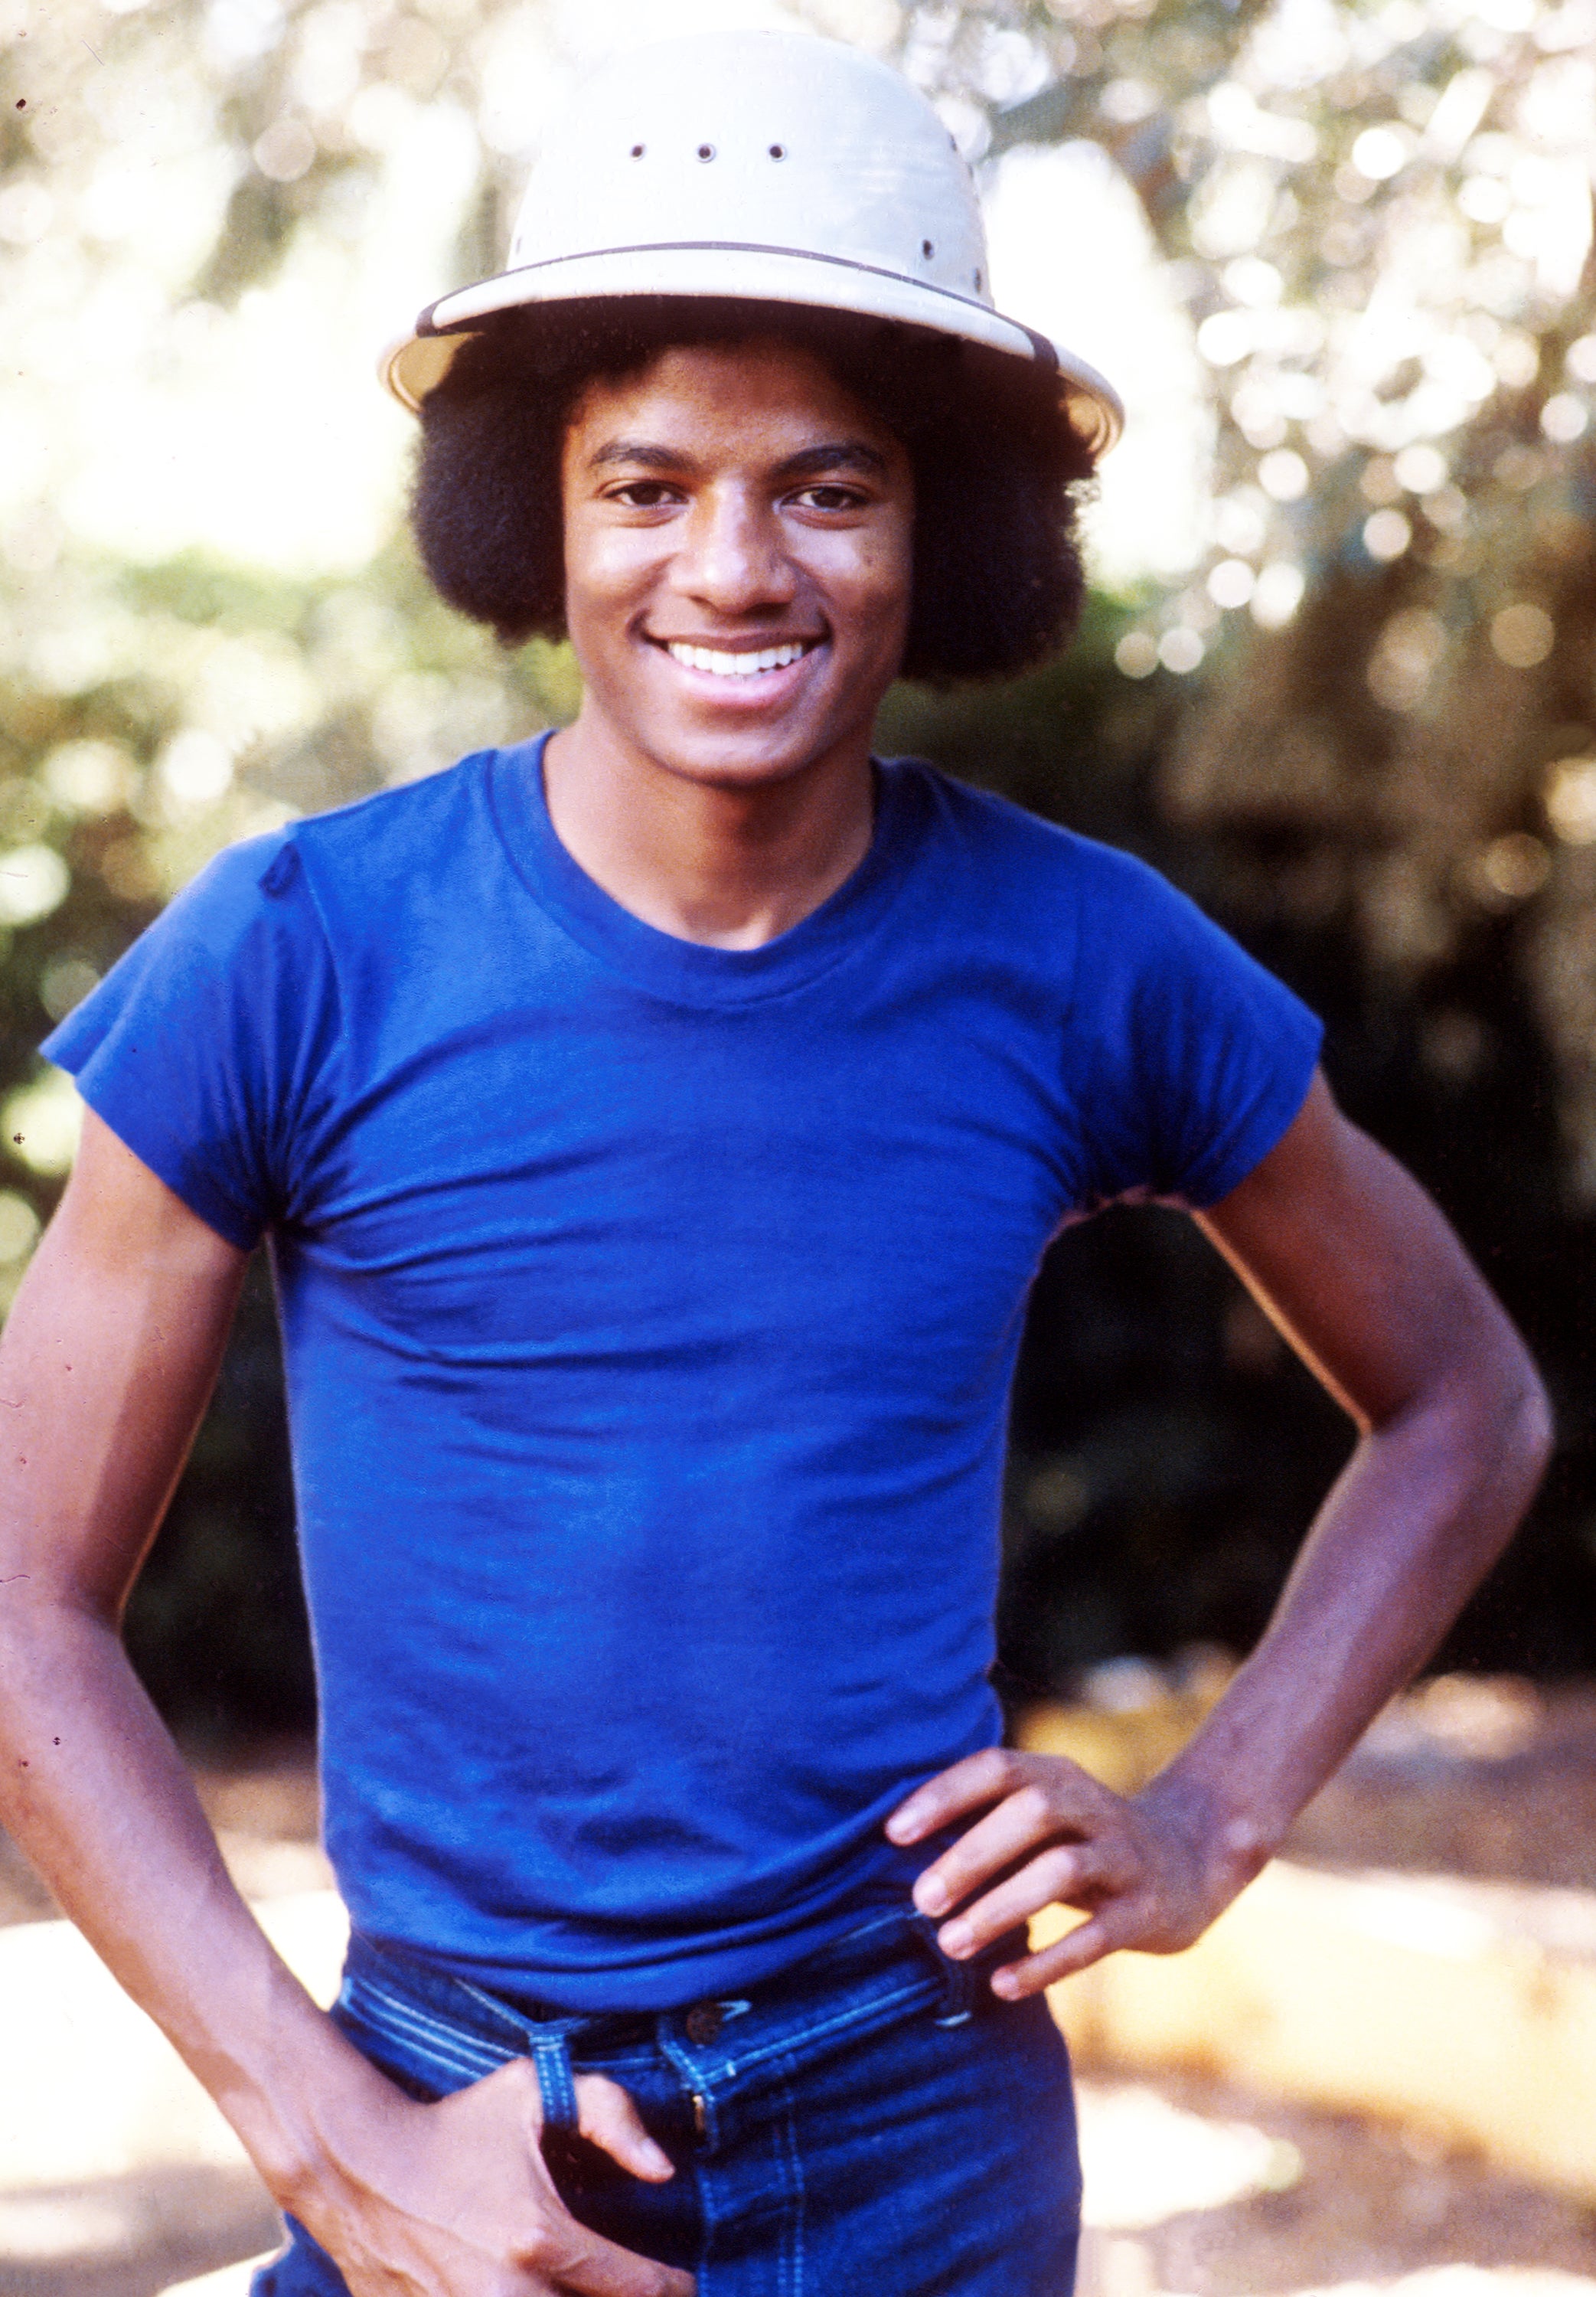 30 Photos That Prove Michael Jackson’s Style Was the Epitome of Cool